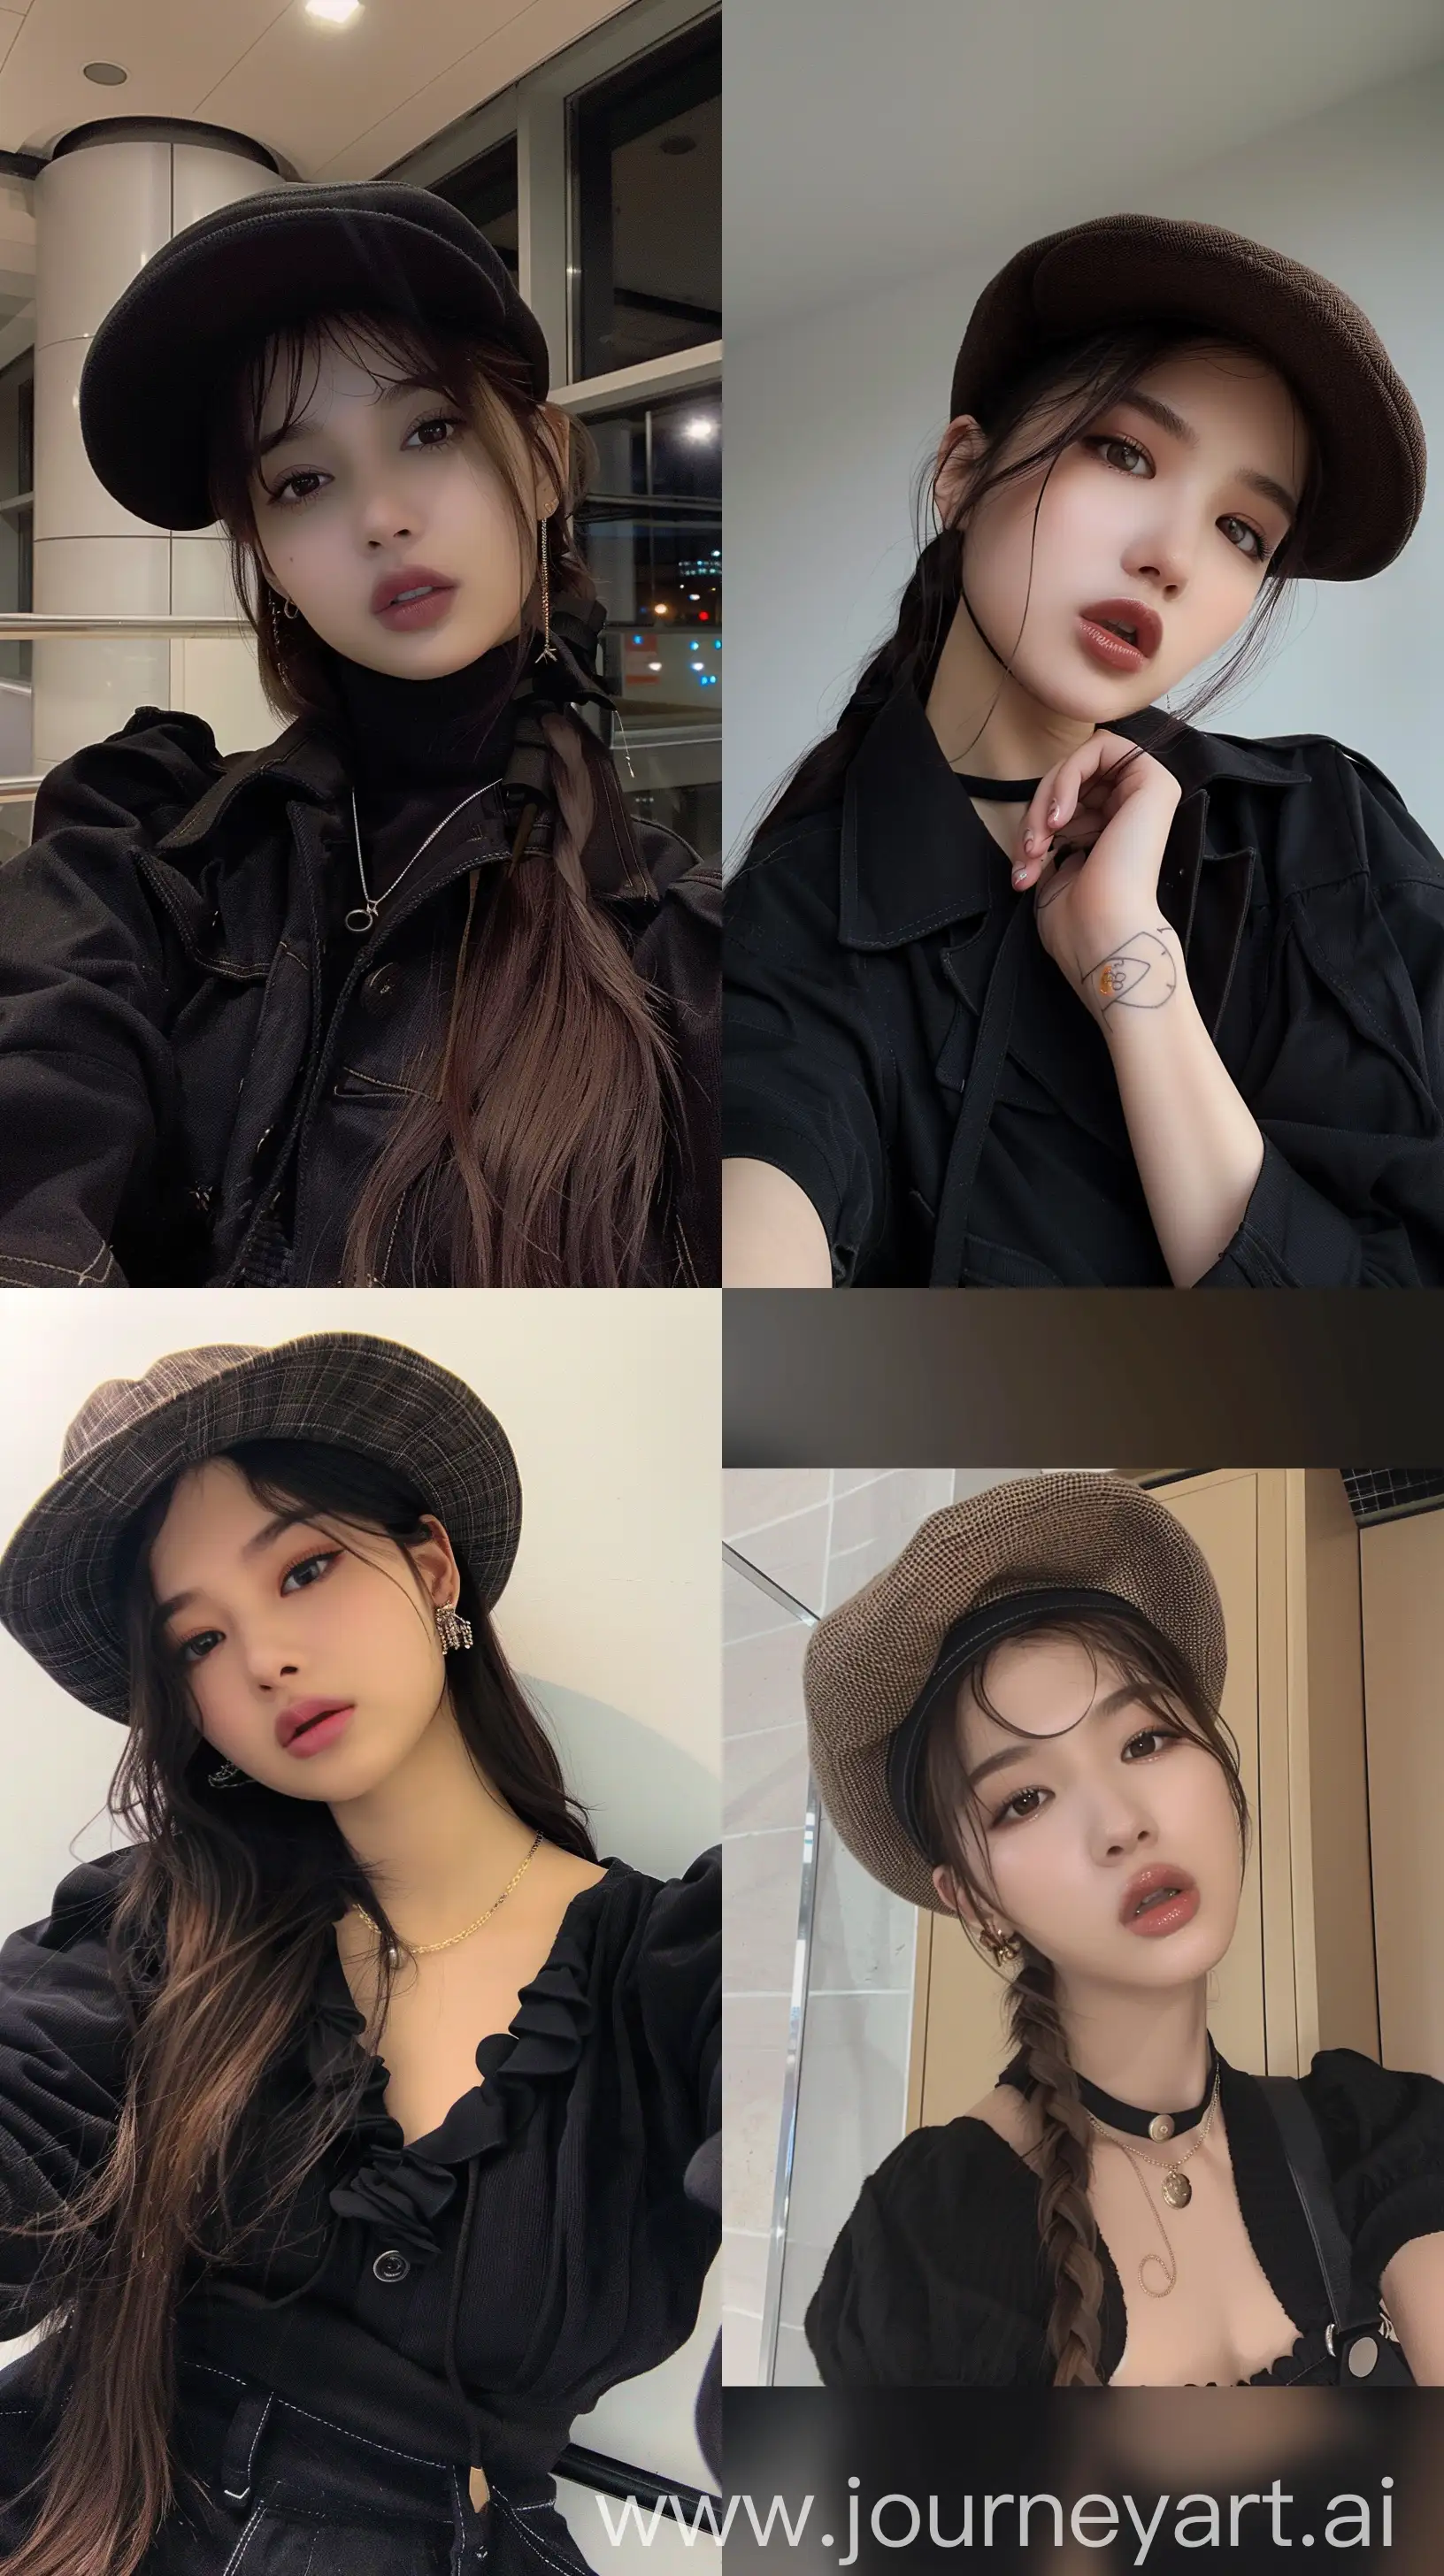 Blackpinks-Jennie-Taking-Aesthetic-Selfie-in-Cute-Black-Outfit-and-Flat-Hat